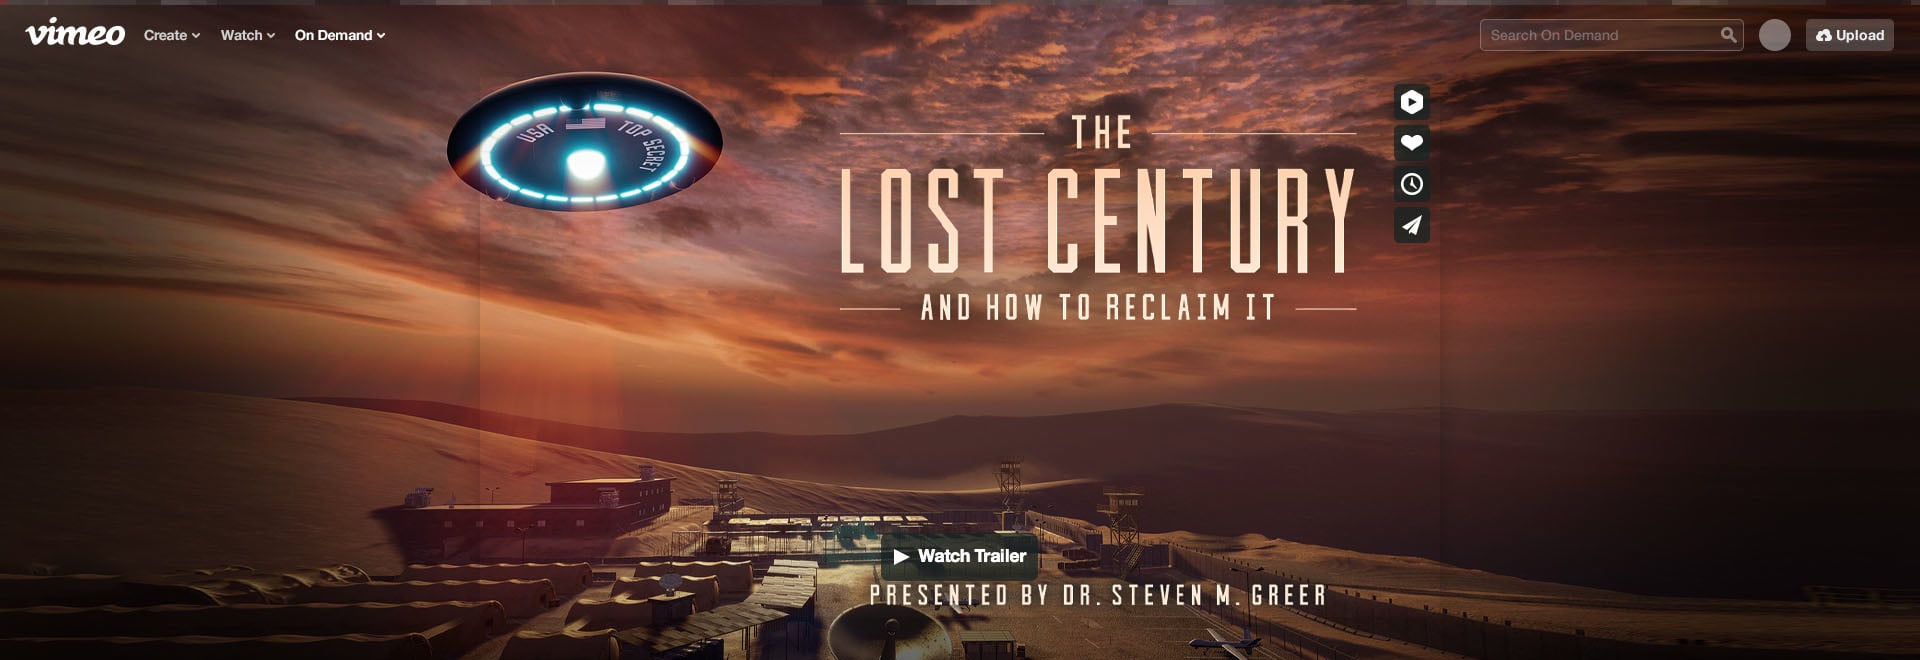 Watch The Lost Century: And How to Reclaim It (4K UHD) Online | Vimeo ...